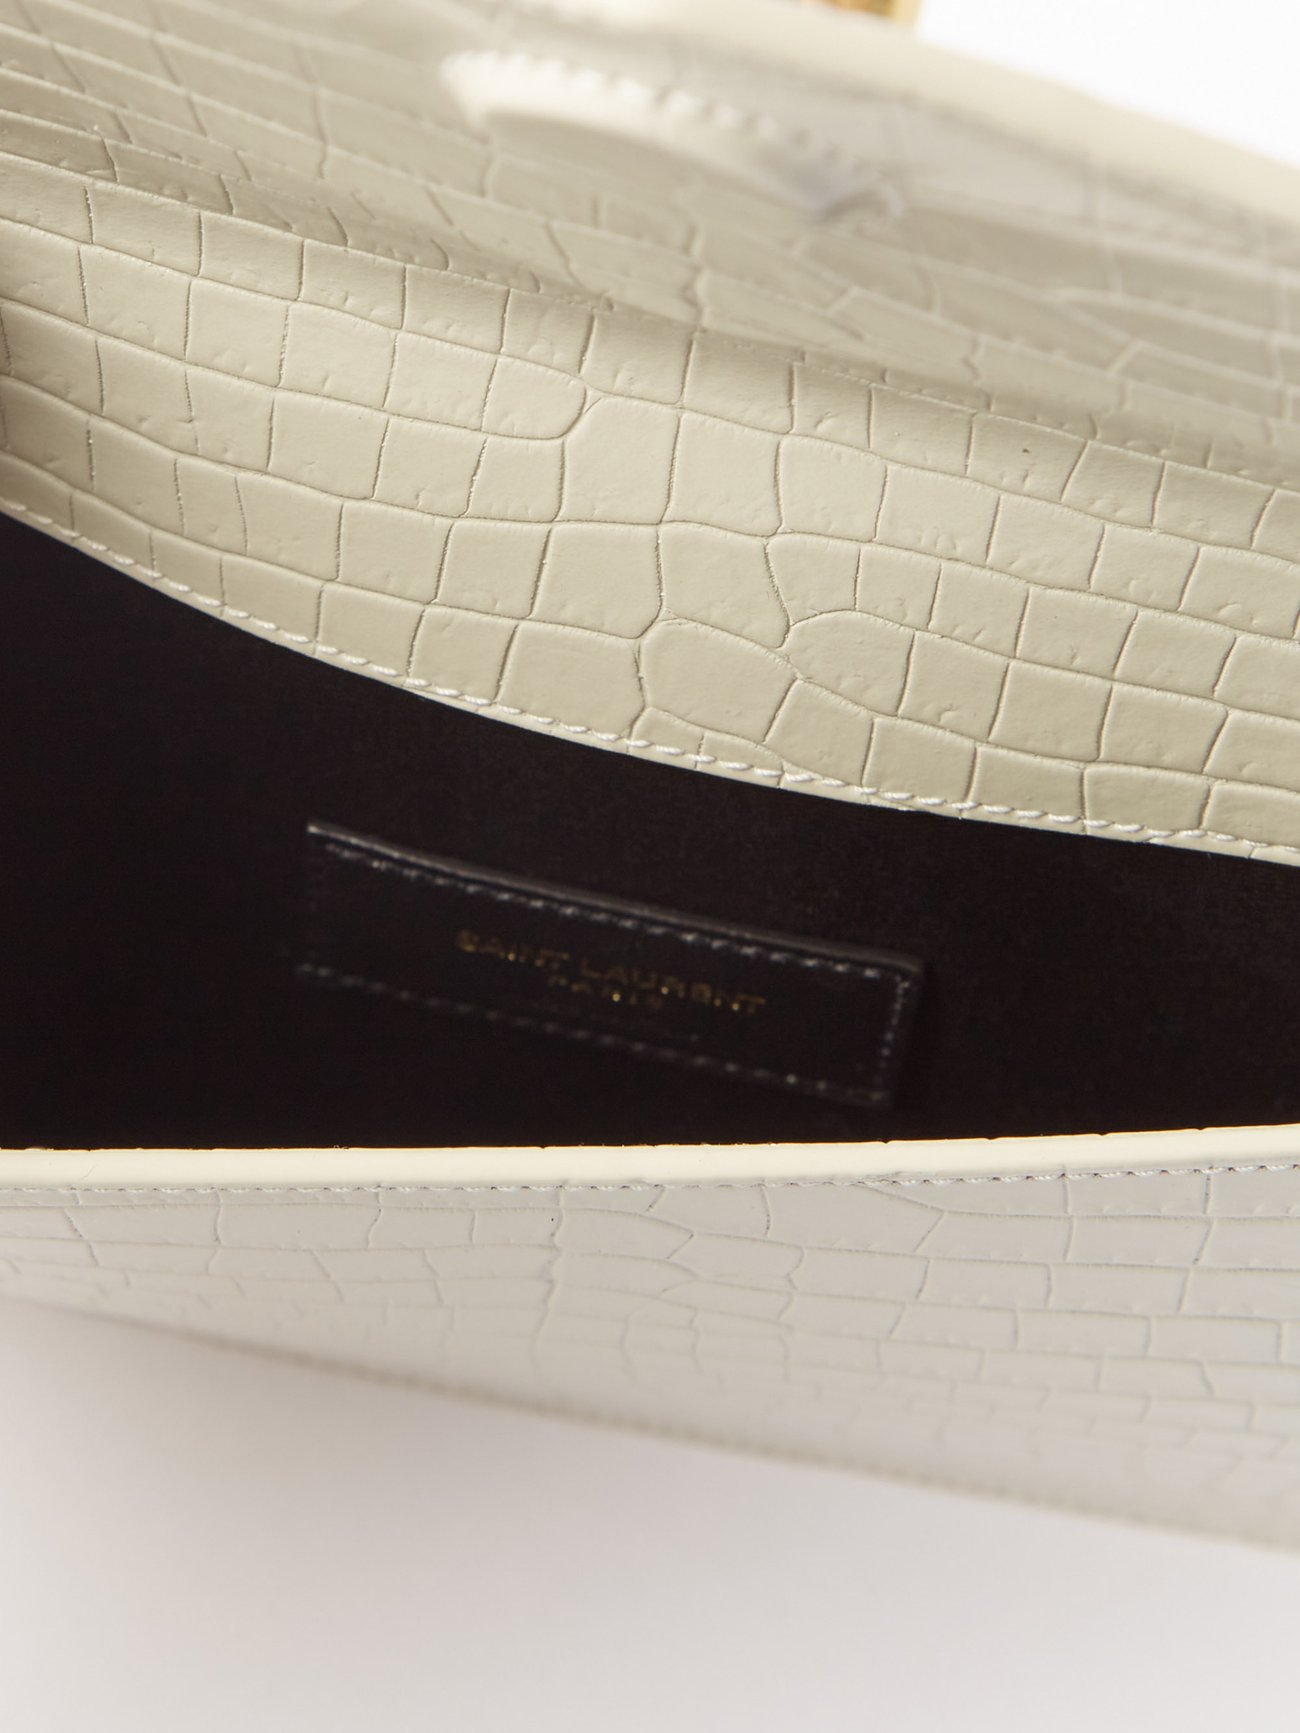 Uptown croc-effect leather pouch